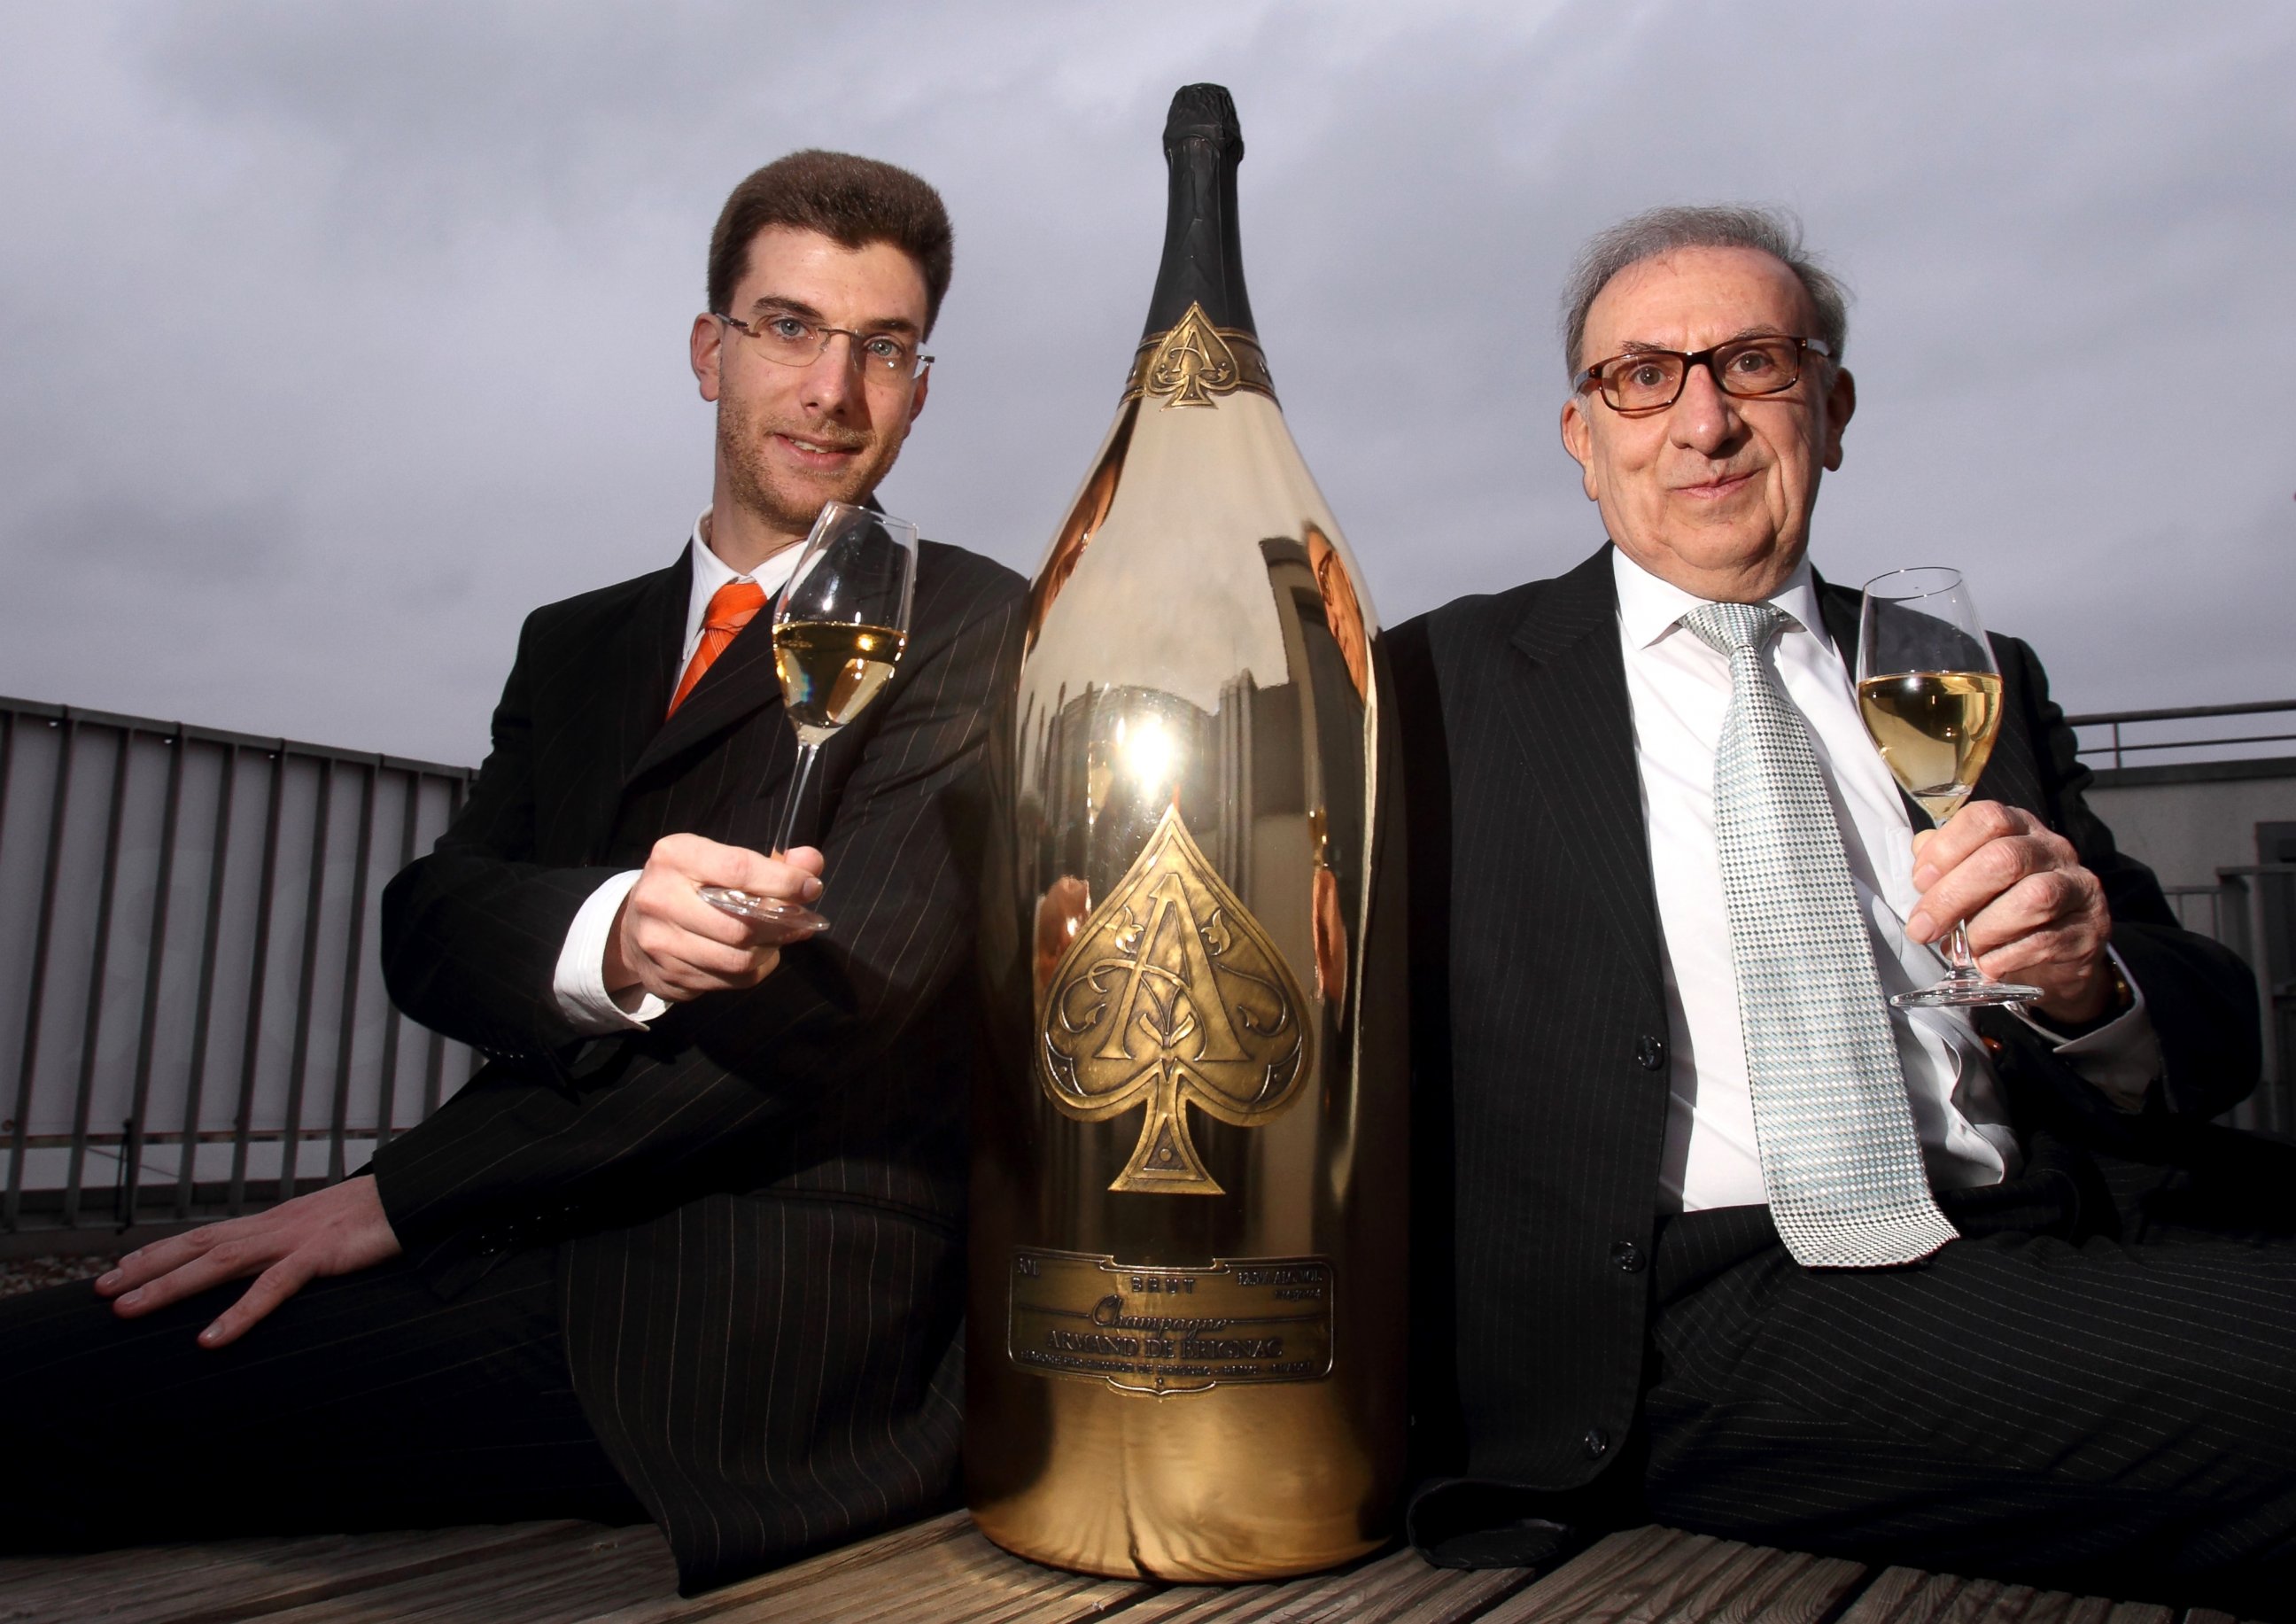 PHOTO: Jean-Jacques Cattier, right, and his son, Alexandre Cattier, pose with the world largest bottle of Champagne "The Midas" by Armand de Brignac, April 6, 2011, in Berlin.